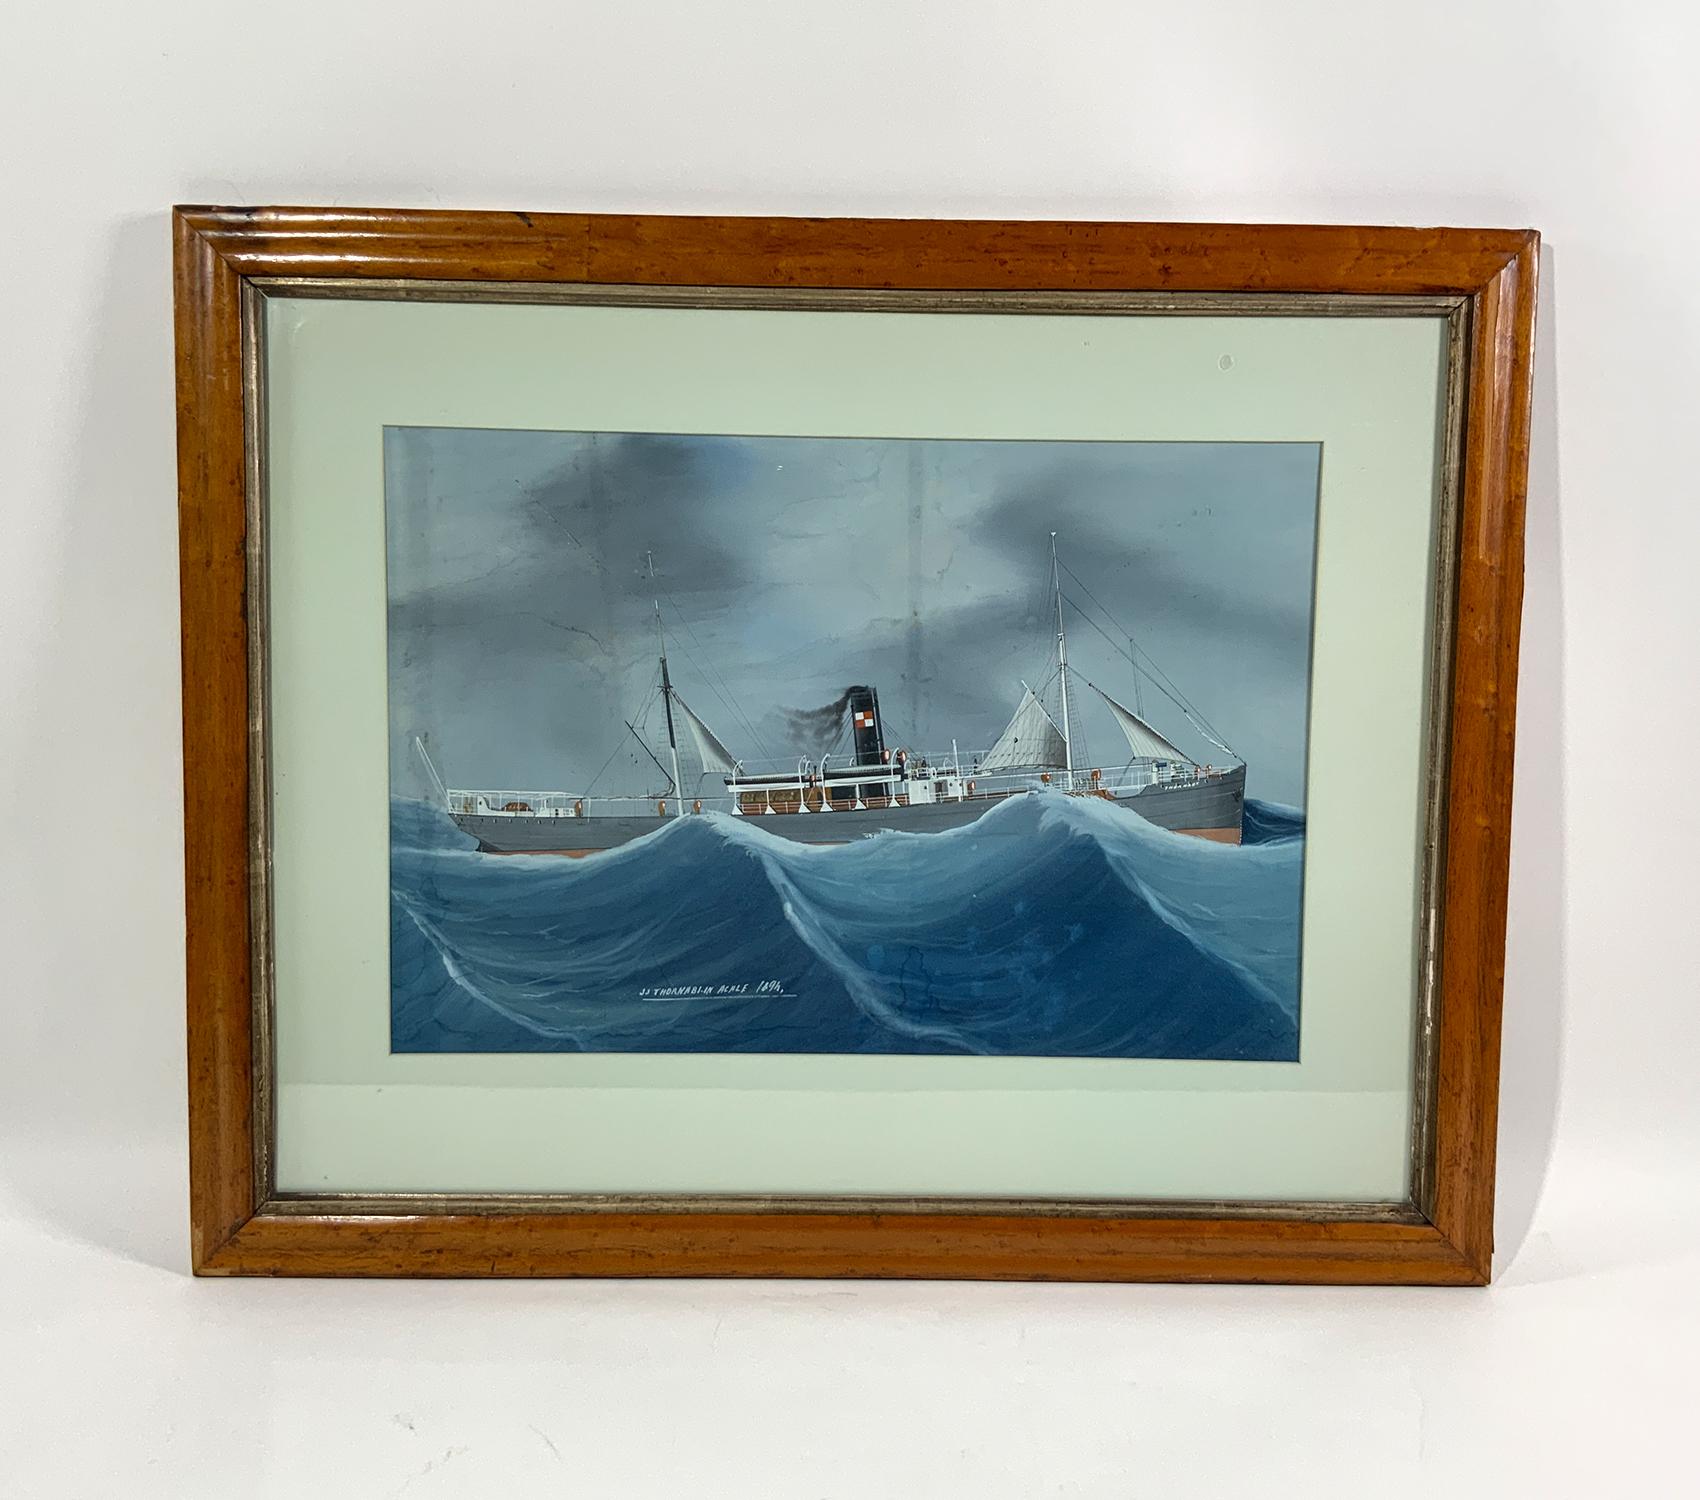 Gouache painting showing snowing the English built Cargo Steamer S.S. Thornaby. The ship was built by Ropner Shipbuilding at Stockton on tees in 1889. She hit a mine and sank in 1916 by the German submarine UC-3. The ship has a grey hull with salmon